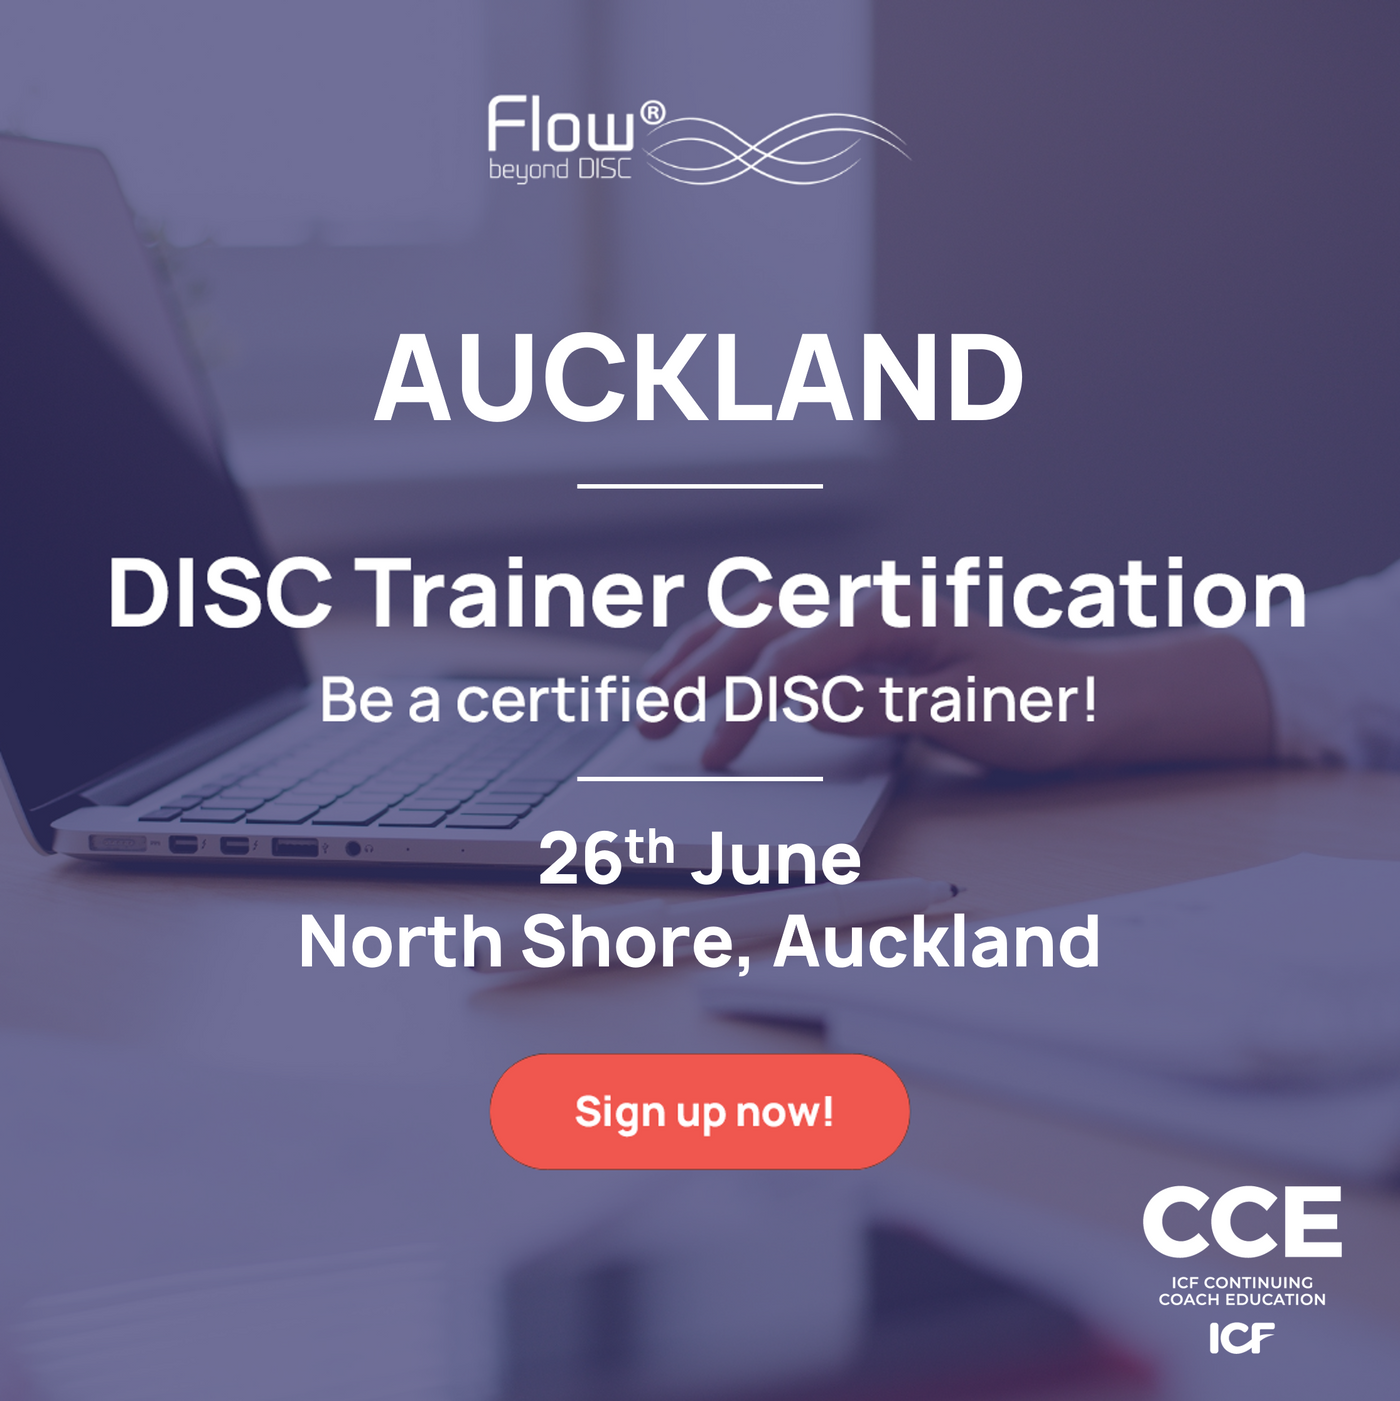 AUCKLAND Advanced Certification Course - receives ICF CCE points